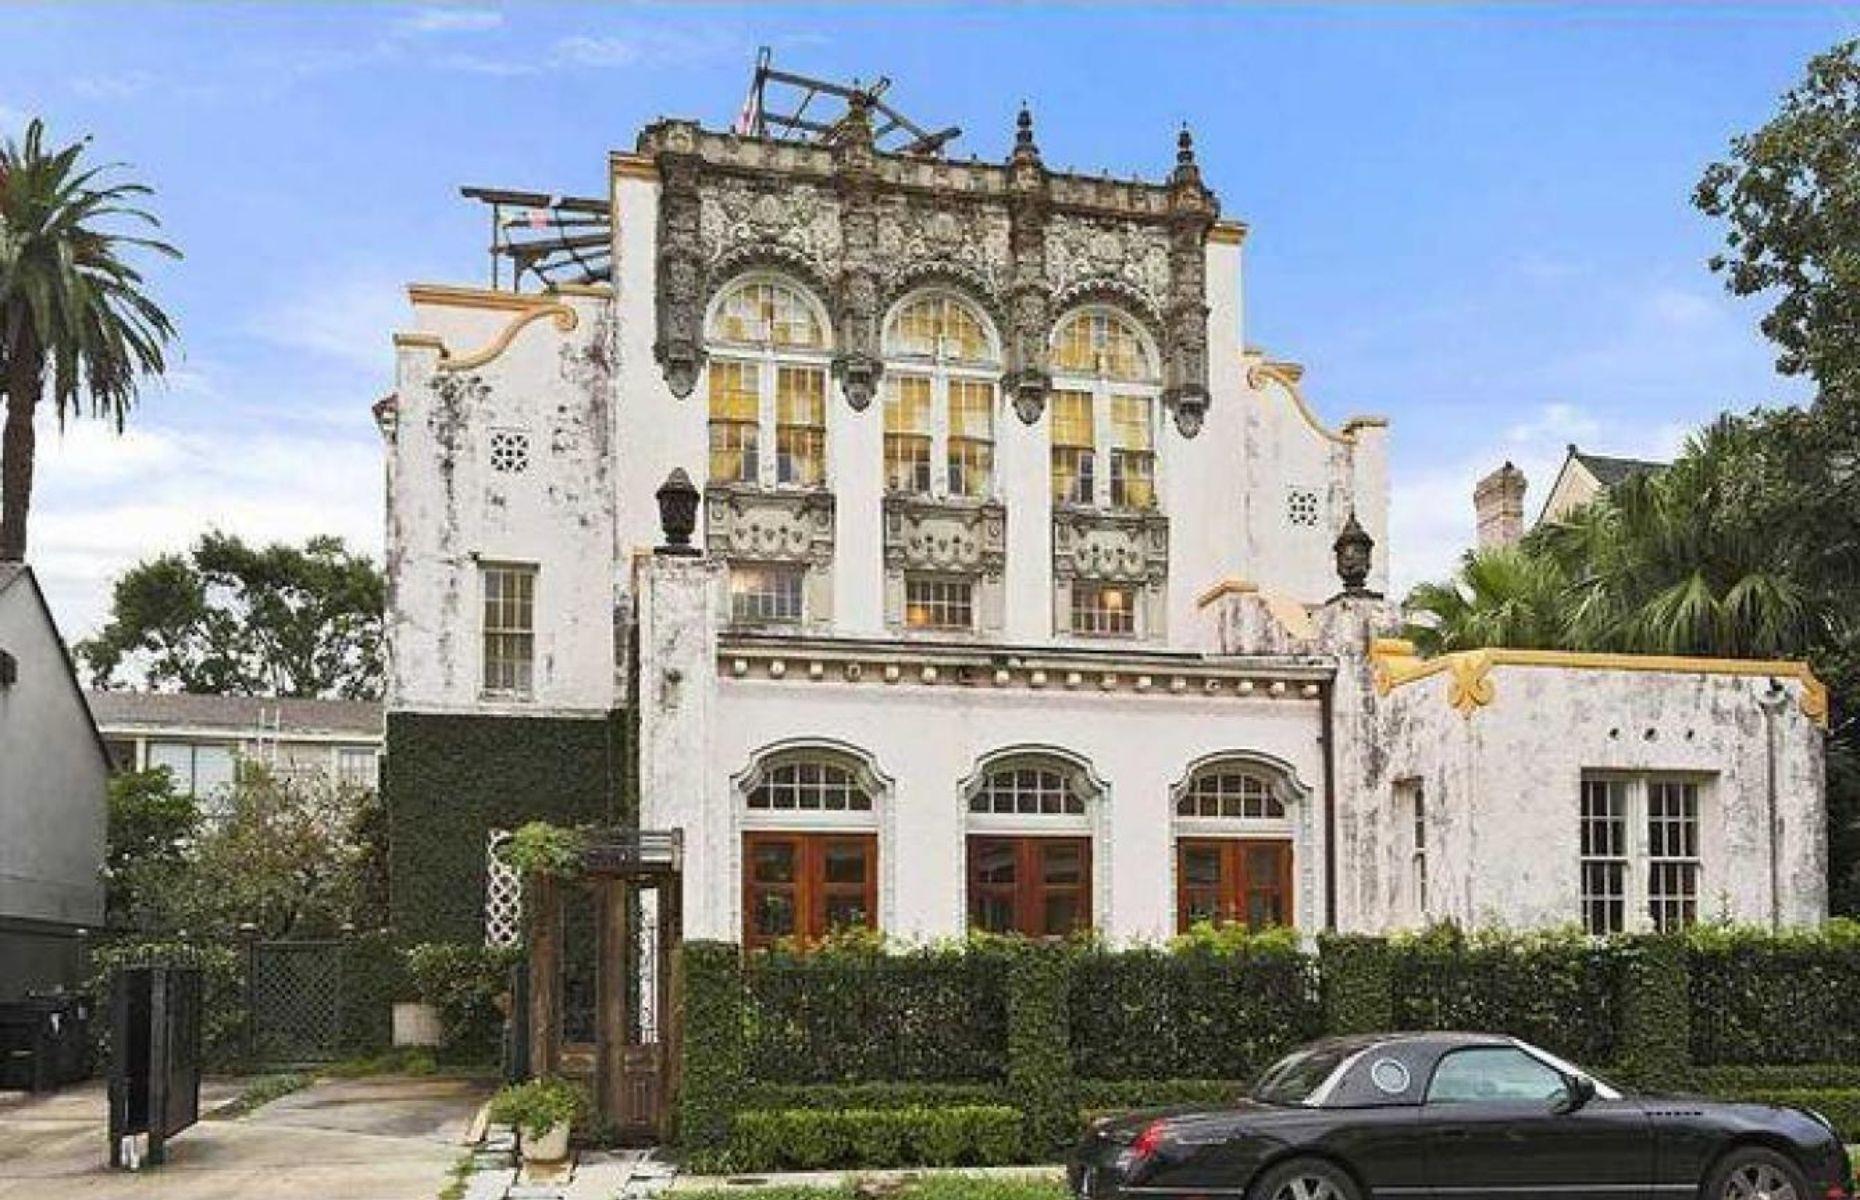 Beyoncé and Jay-Z’s New Orleans church conversion